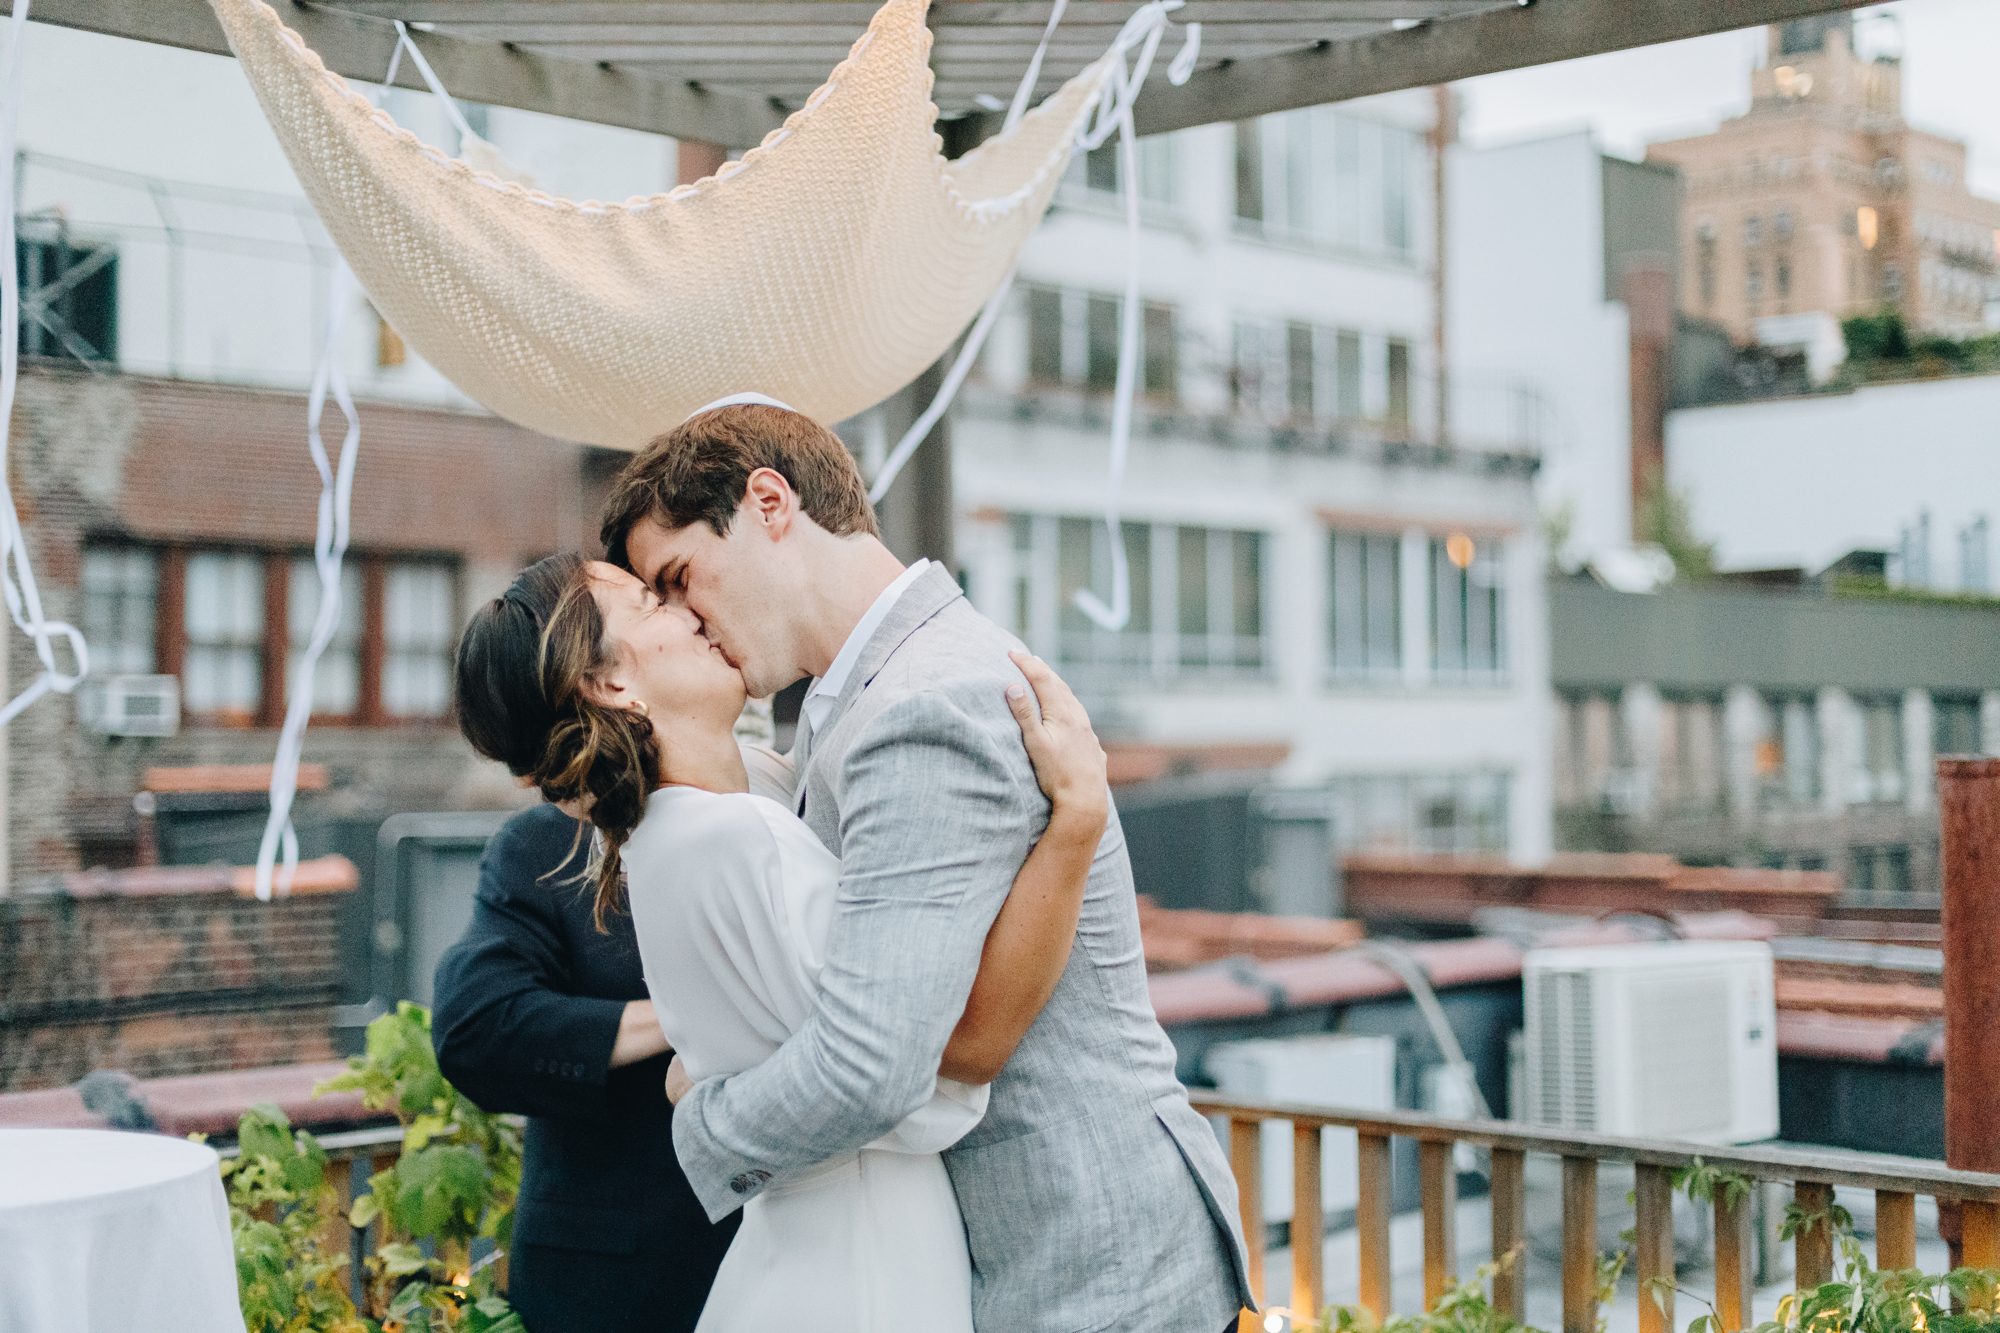 Rooftop micro wedding photography in New York City